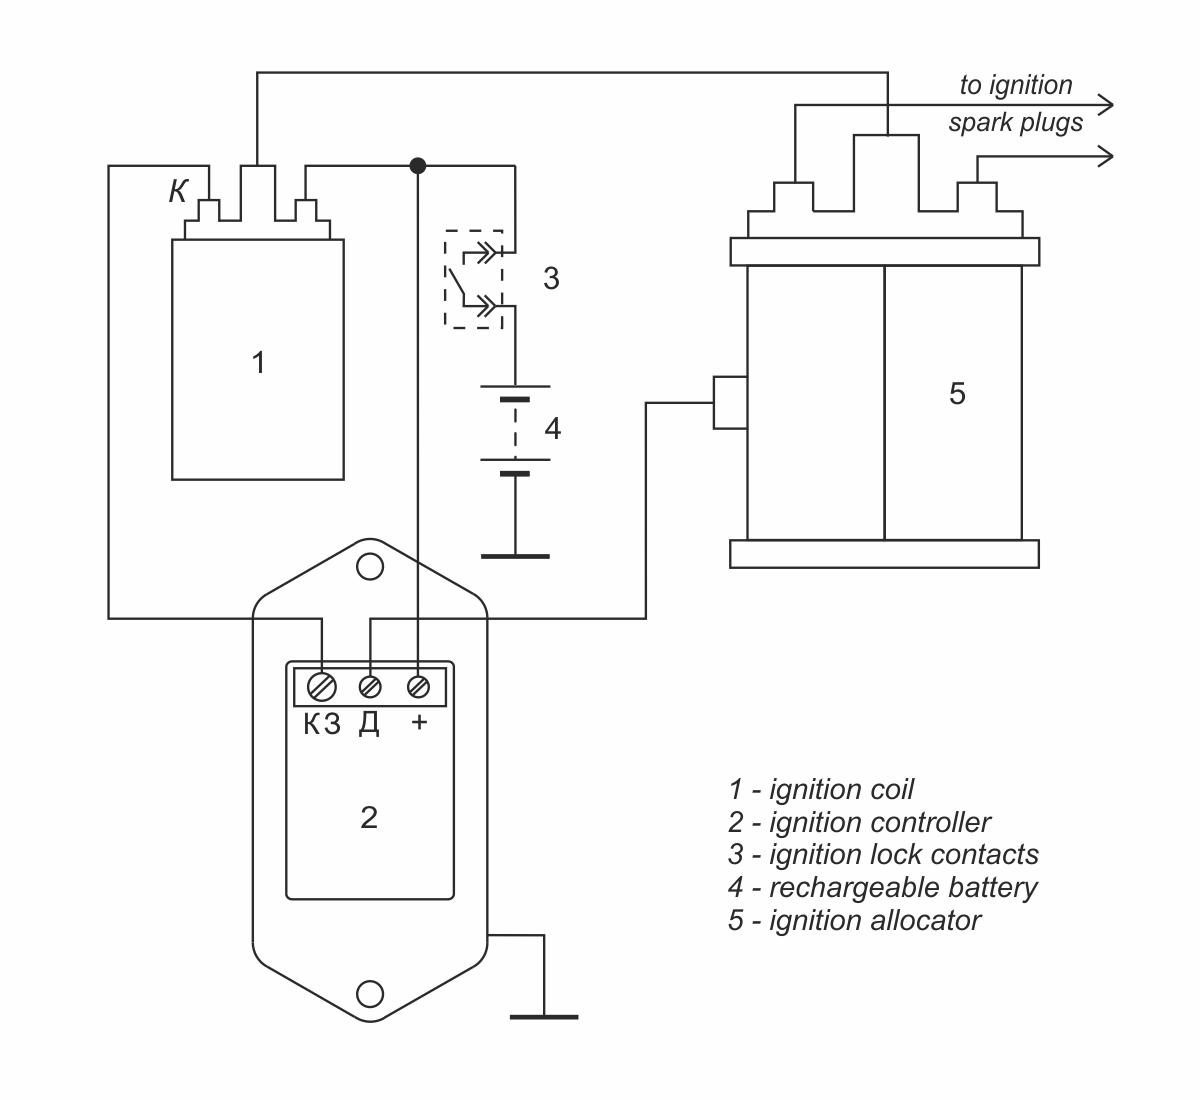 Connection diagram of ignition controller 90.3734